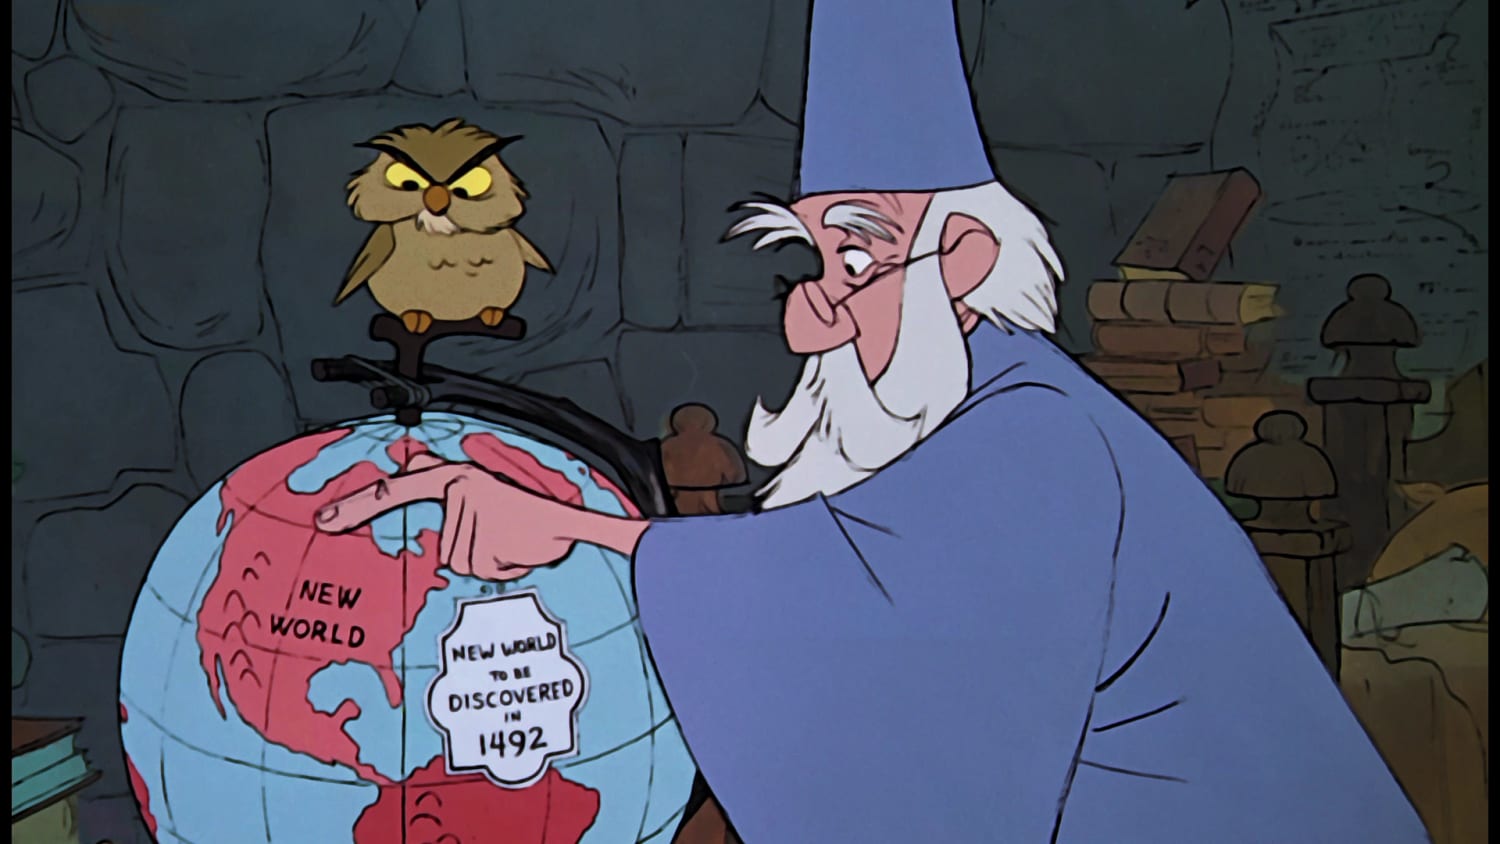 Merlin's globe from The Sword in the Stone by Disney (1963)